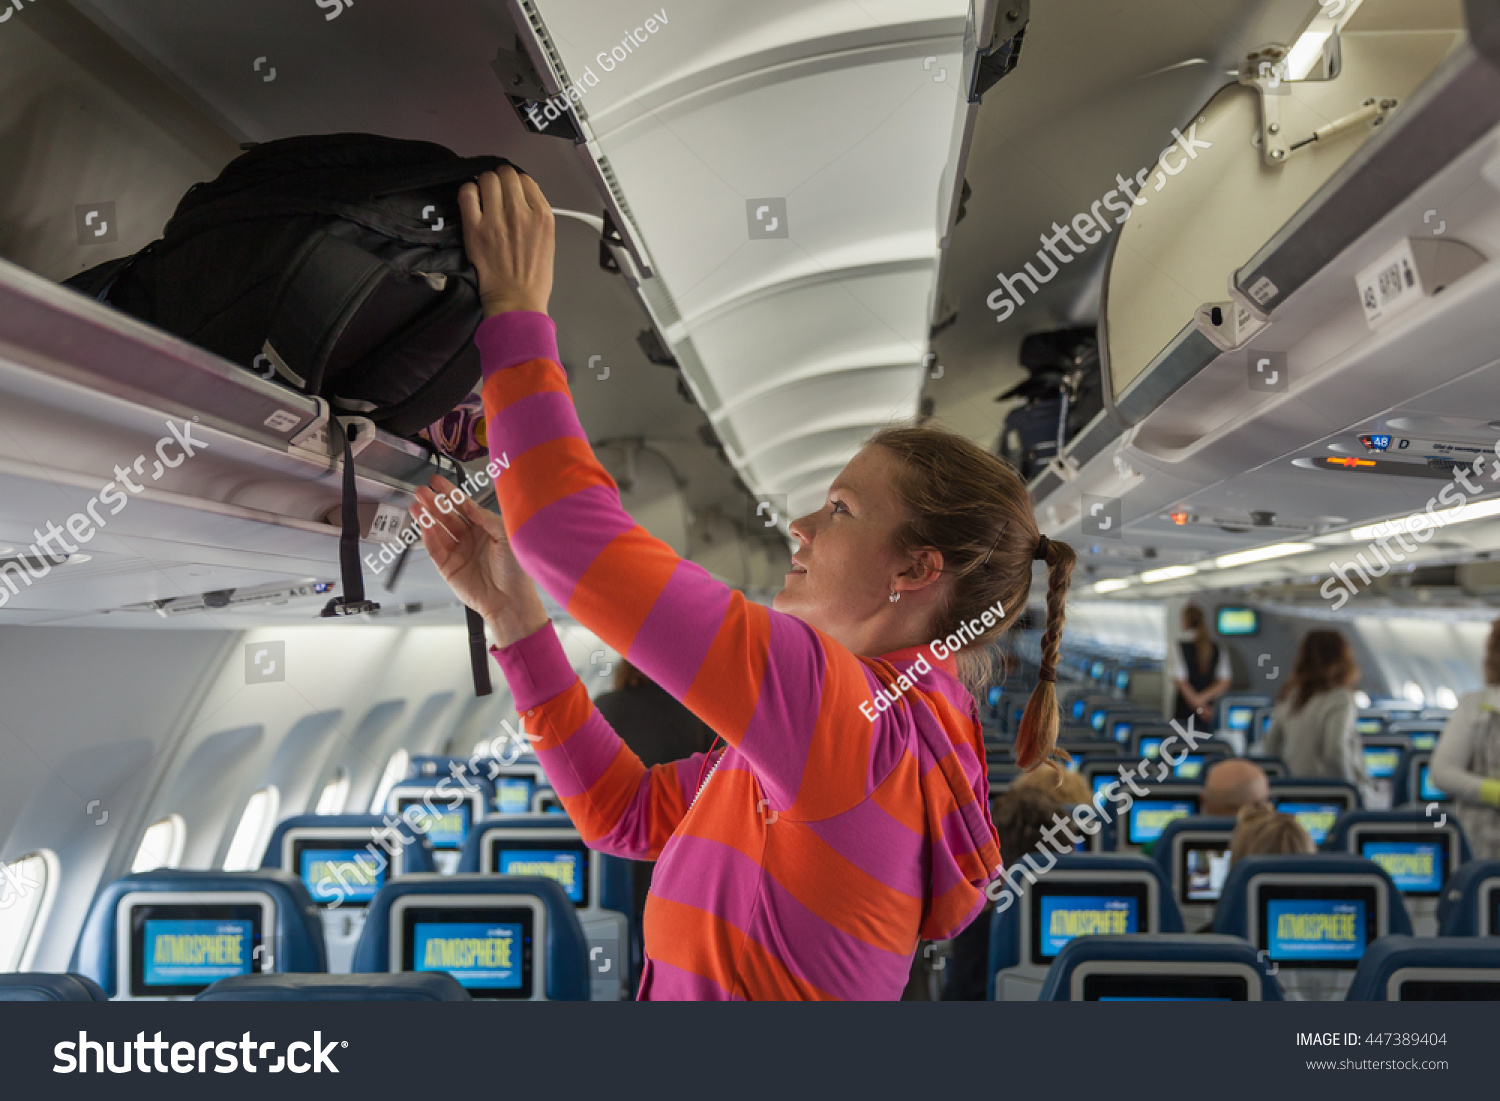 The young girl placed her hand luggage into the compartment on the plane #447389404